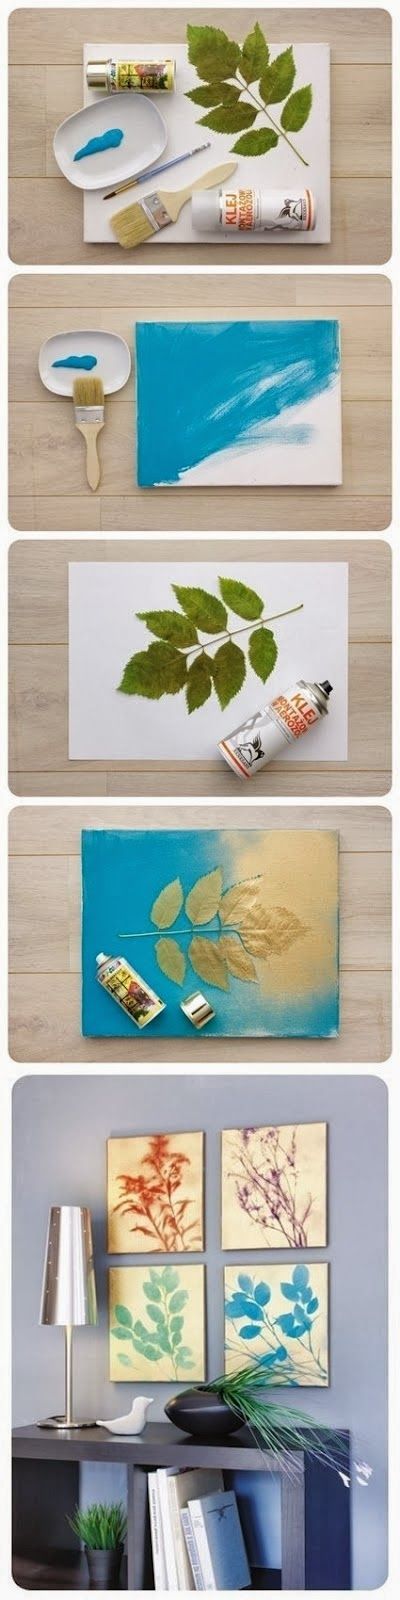 20+Easy+DIY+Art+Projects+for+Your+Walls	 20+Easy+DIY+Art+Projects+for+Your+Walls